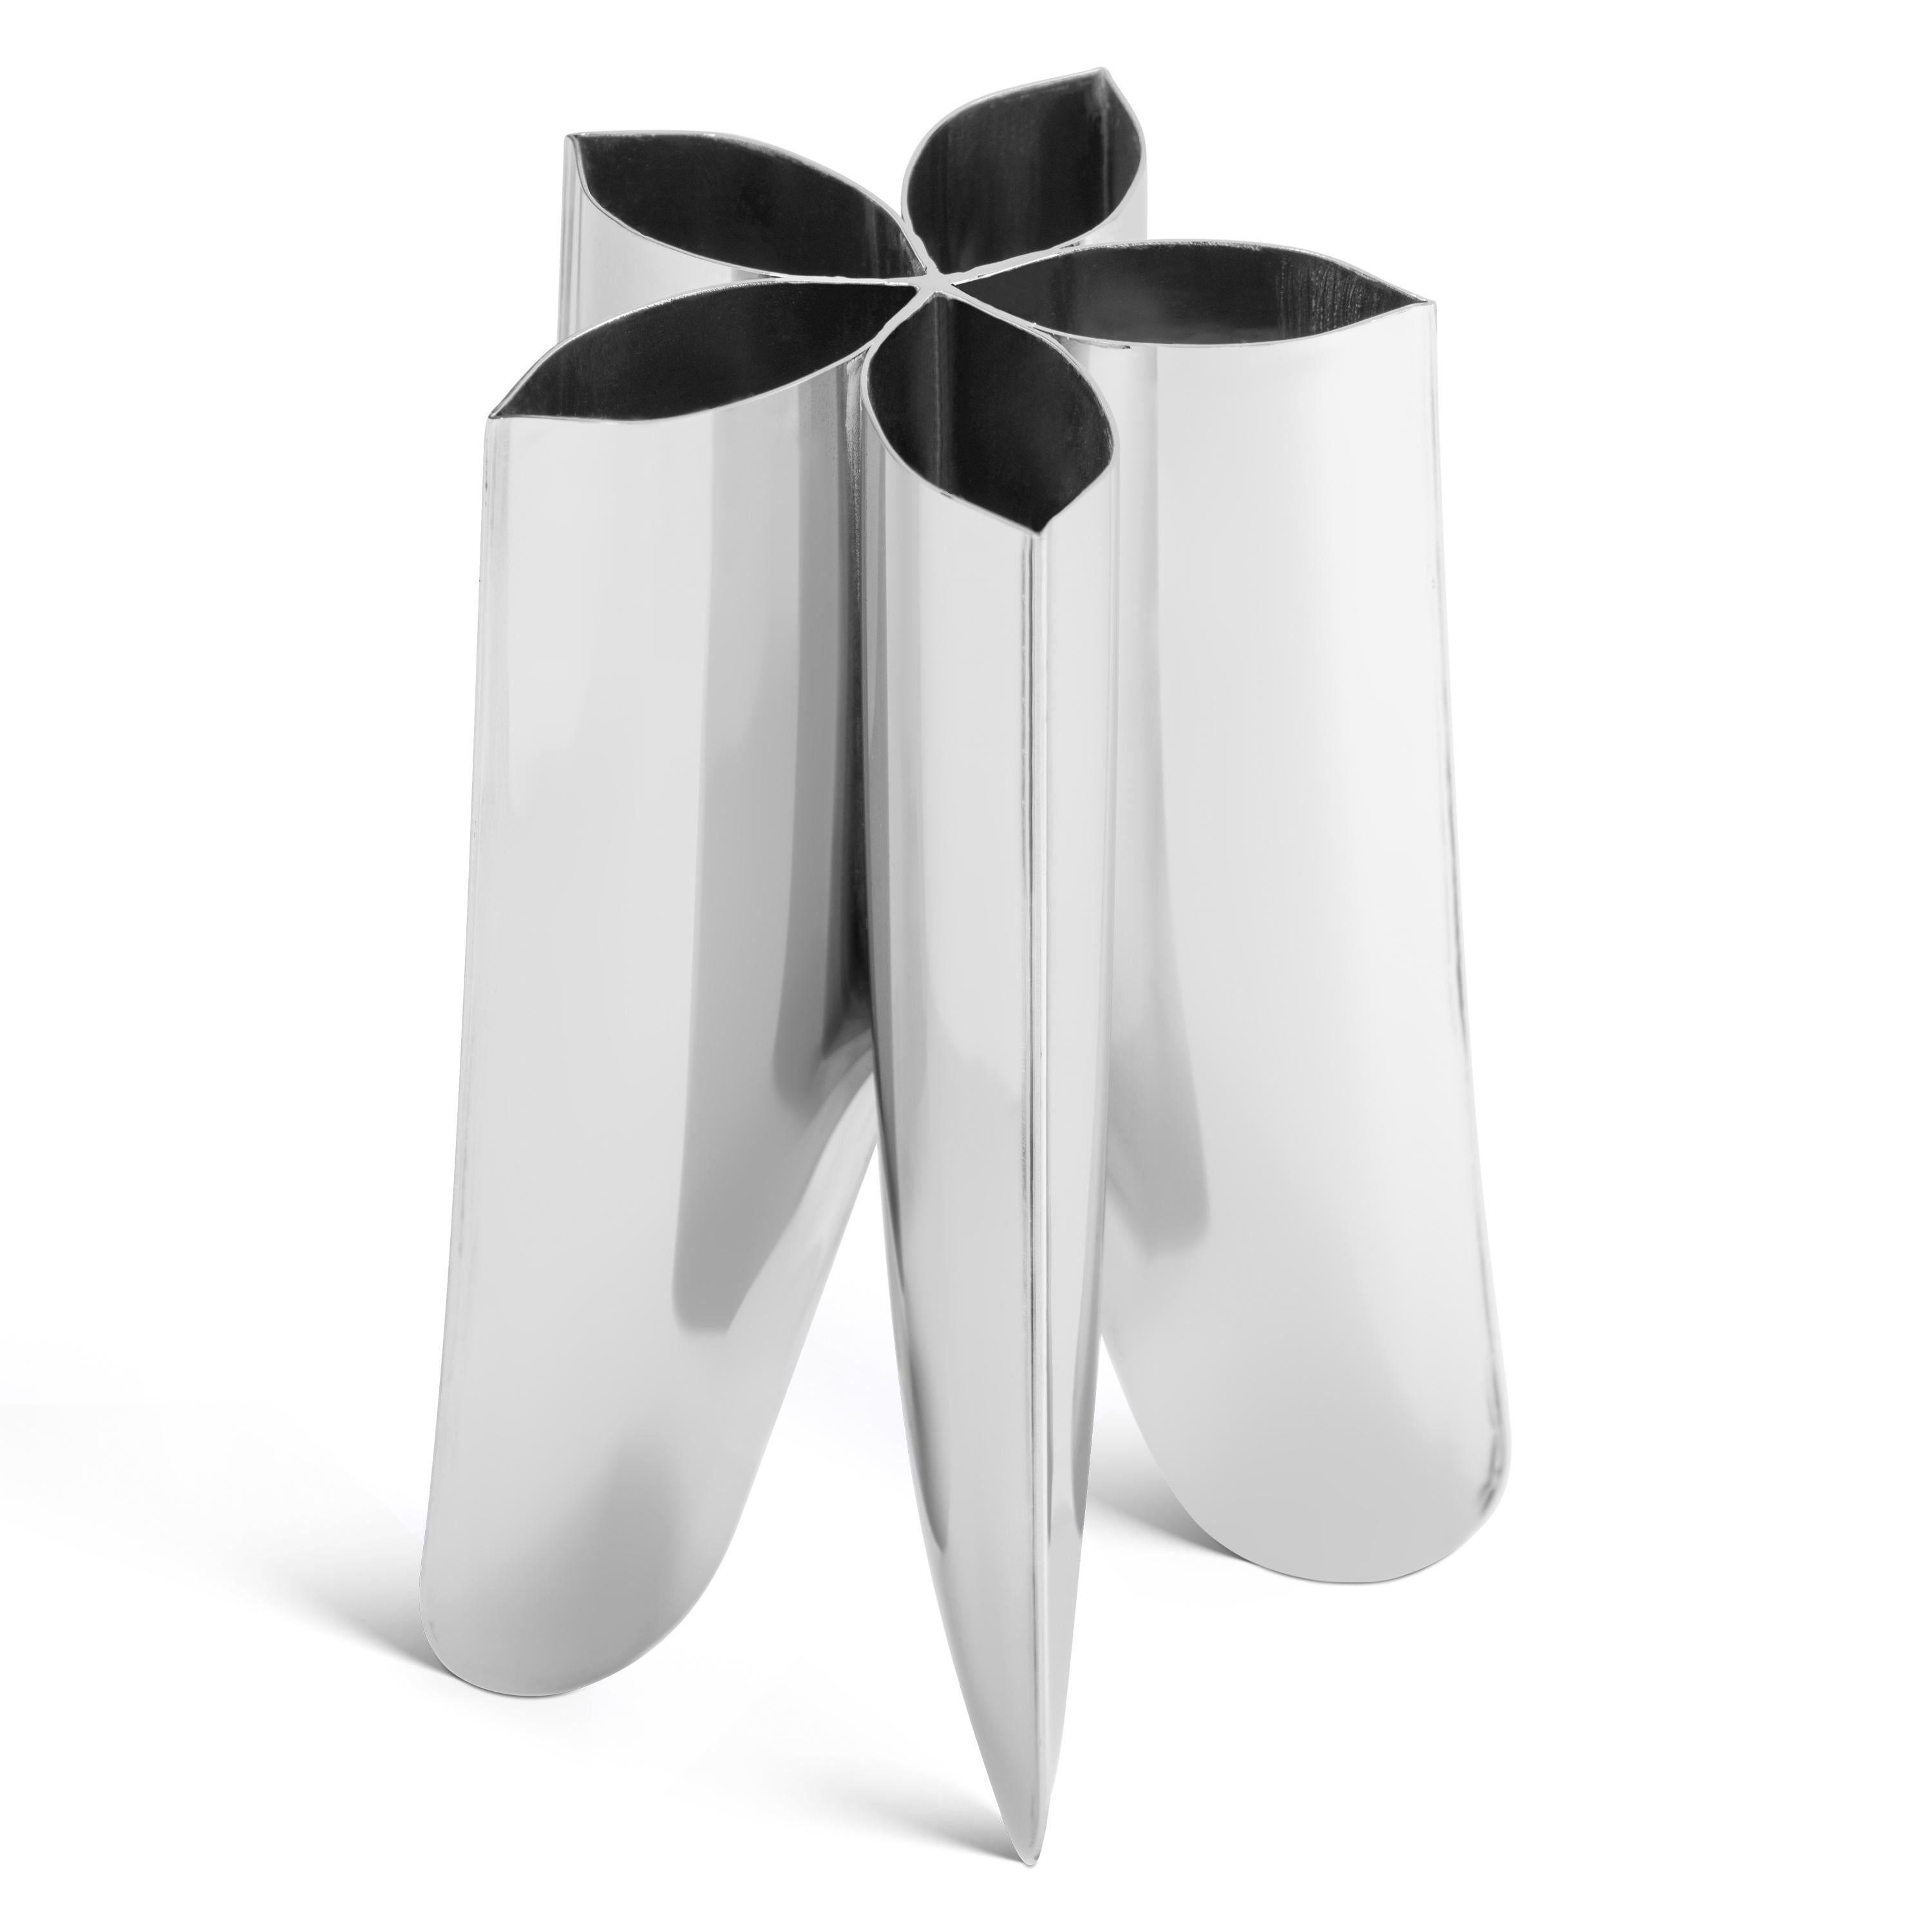 Polish Contemporary Vase, 'Rotation Vase' by Zieta, Medium, Stainless Steel For Sale